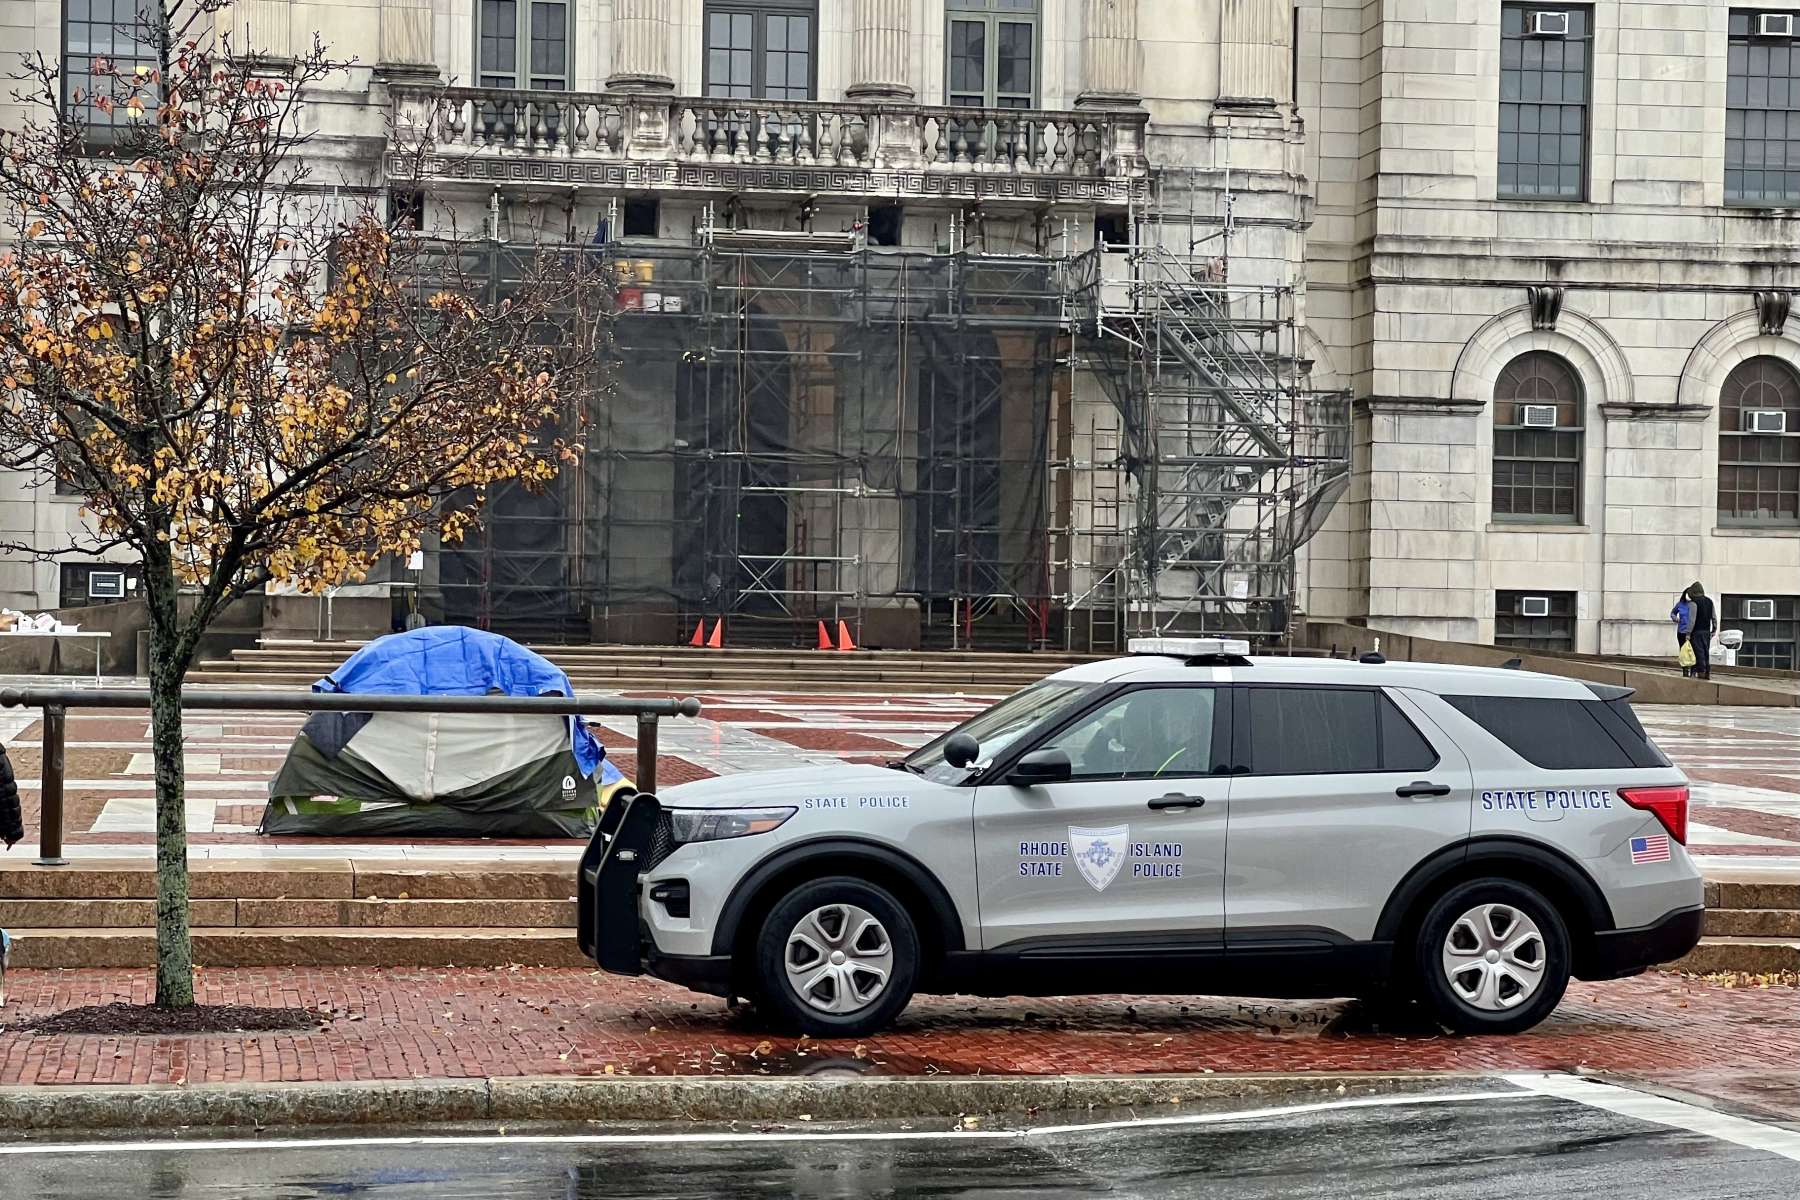 Rhode Island News: Governor McKee grilled on State House encampment eviction